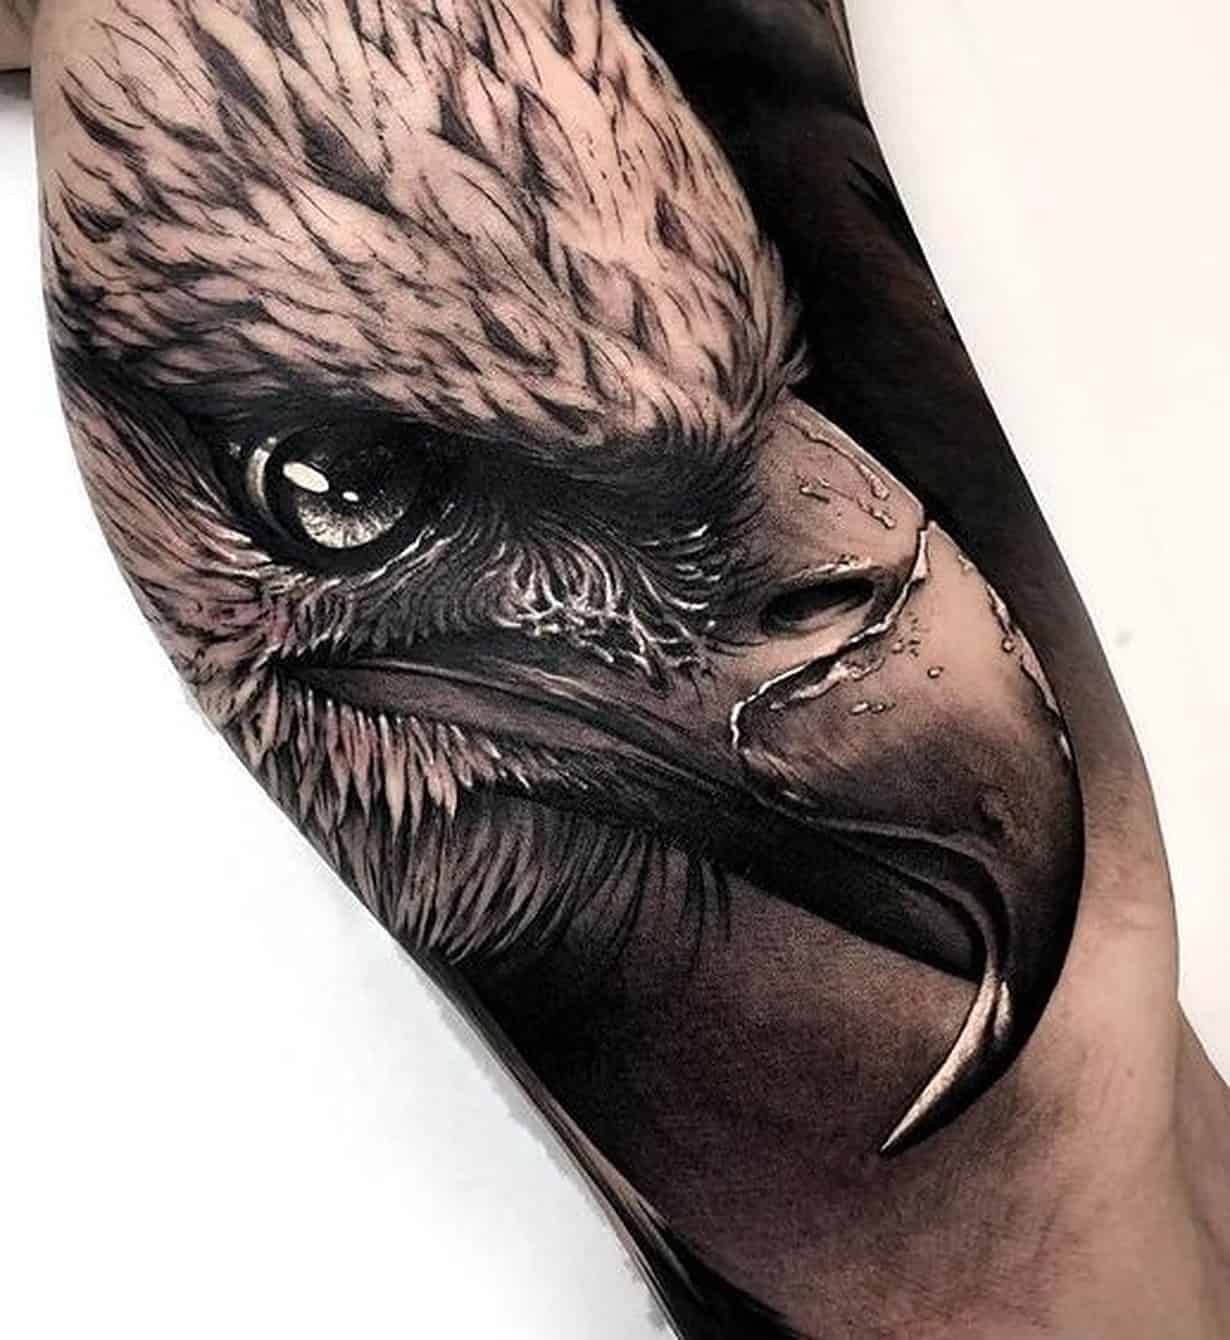 30 Best Eagle Tattoo Design Ideas And What They Mean  Saved Tattoo